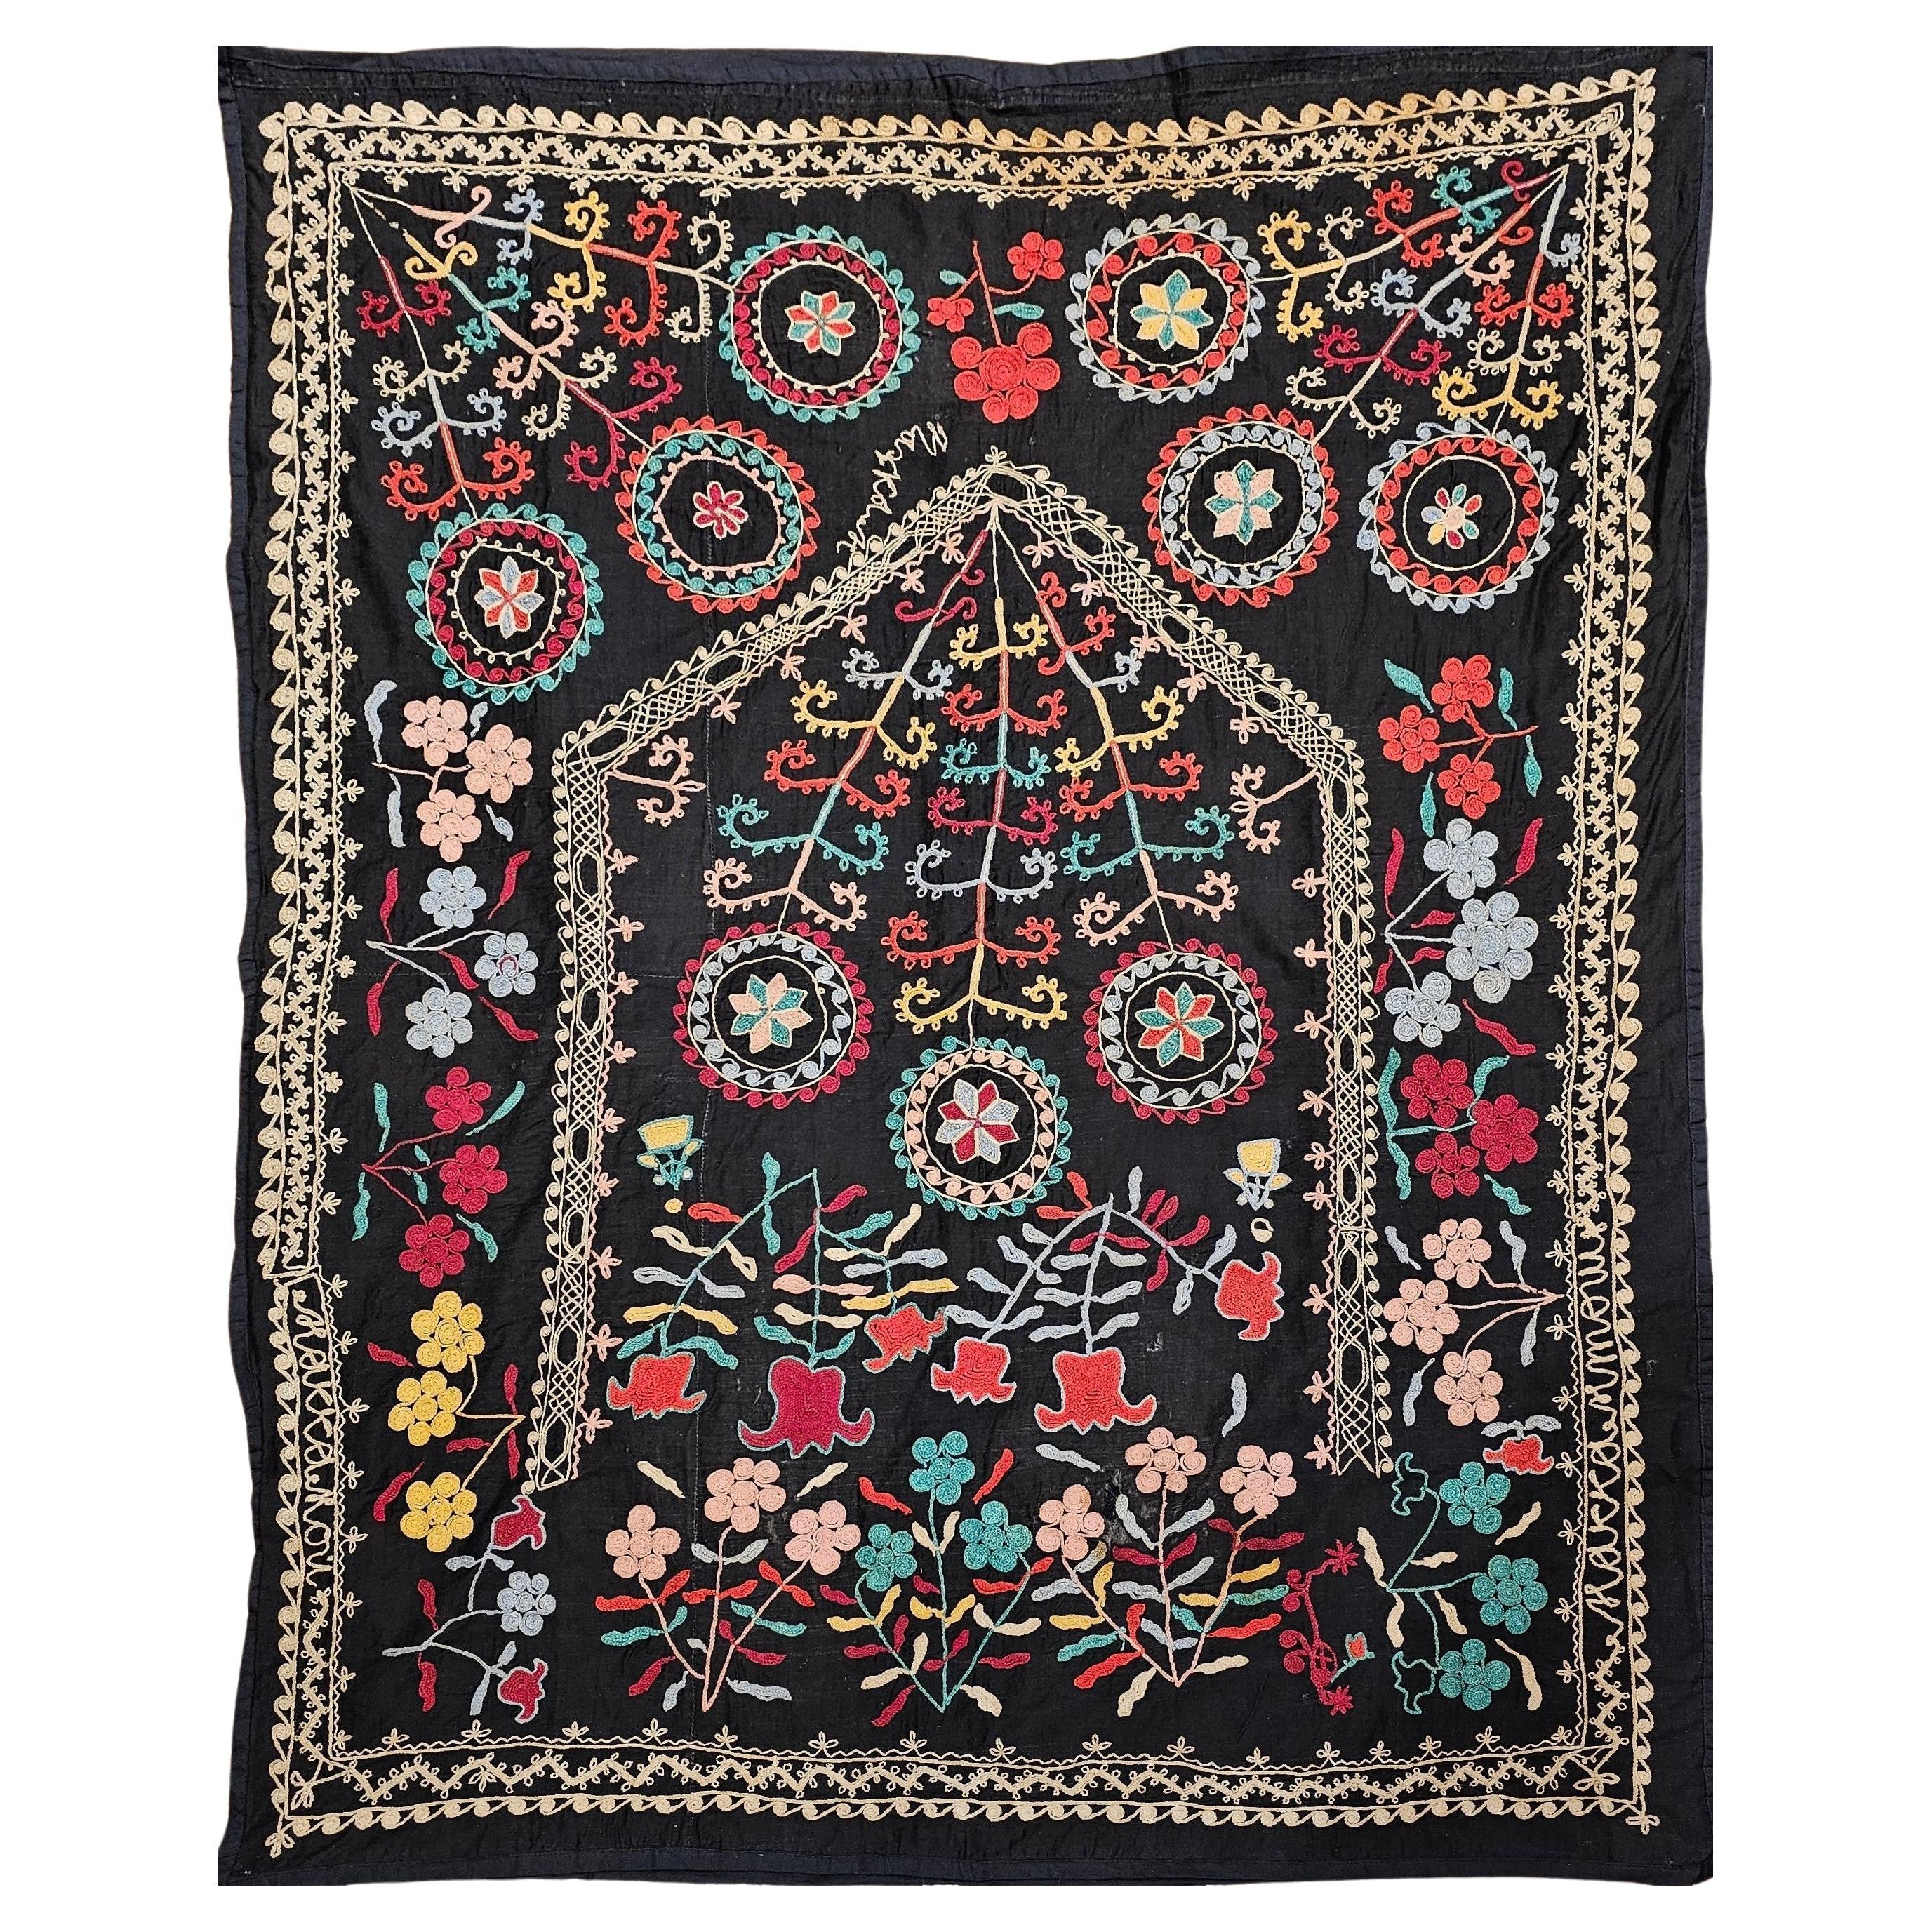 Vintage Hand Embroidered Uzbek Silk Suzani in Black, Red, Green, Yellow Wall Art For Sale